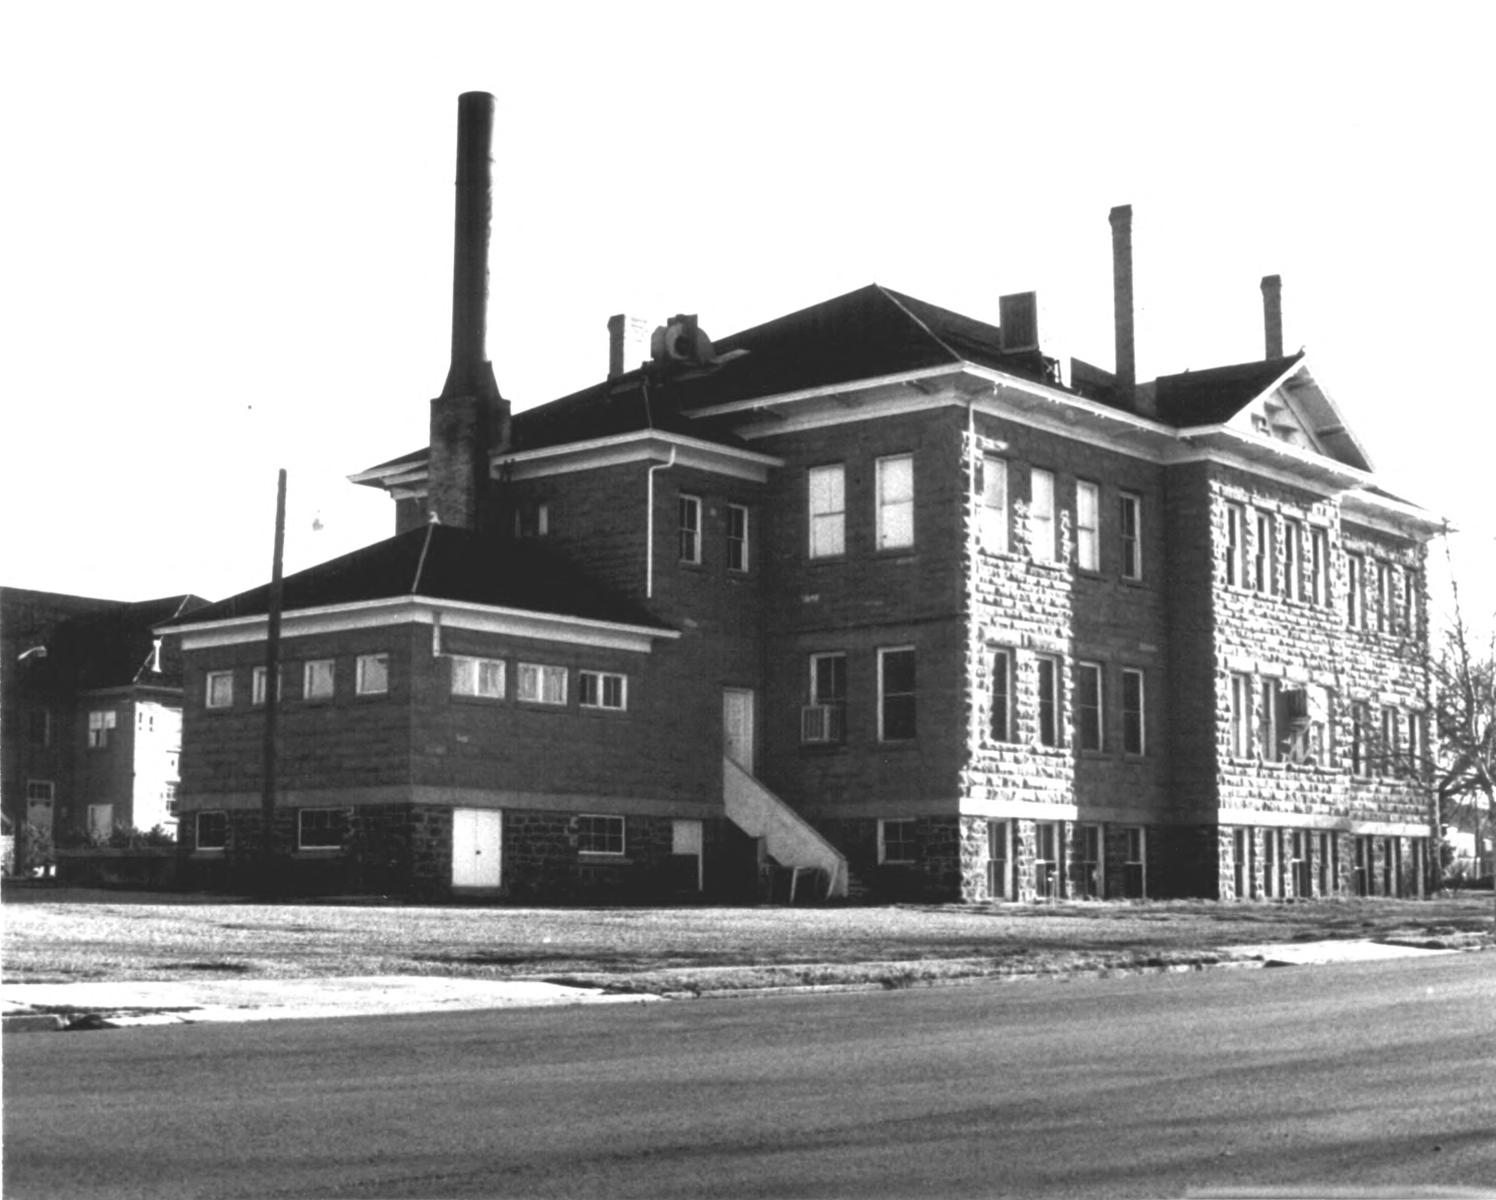 West (back) and south sides of the Dixie Academy Building in 1980